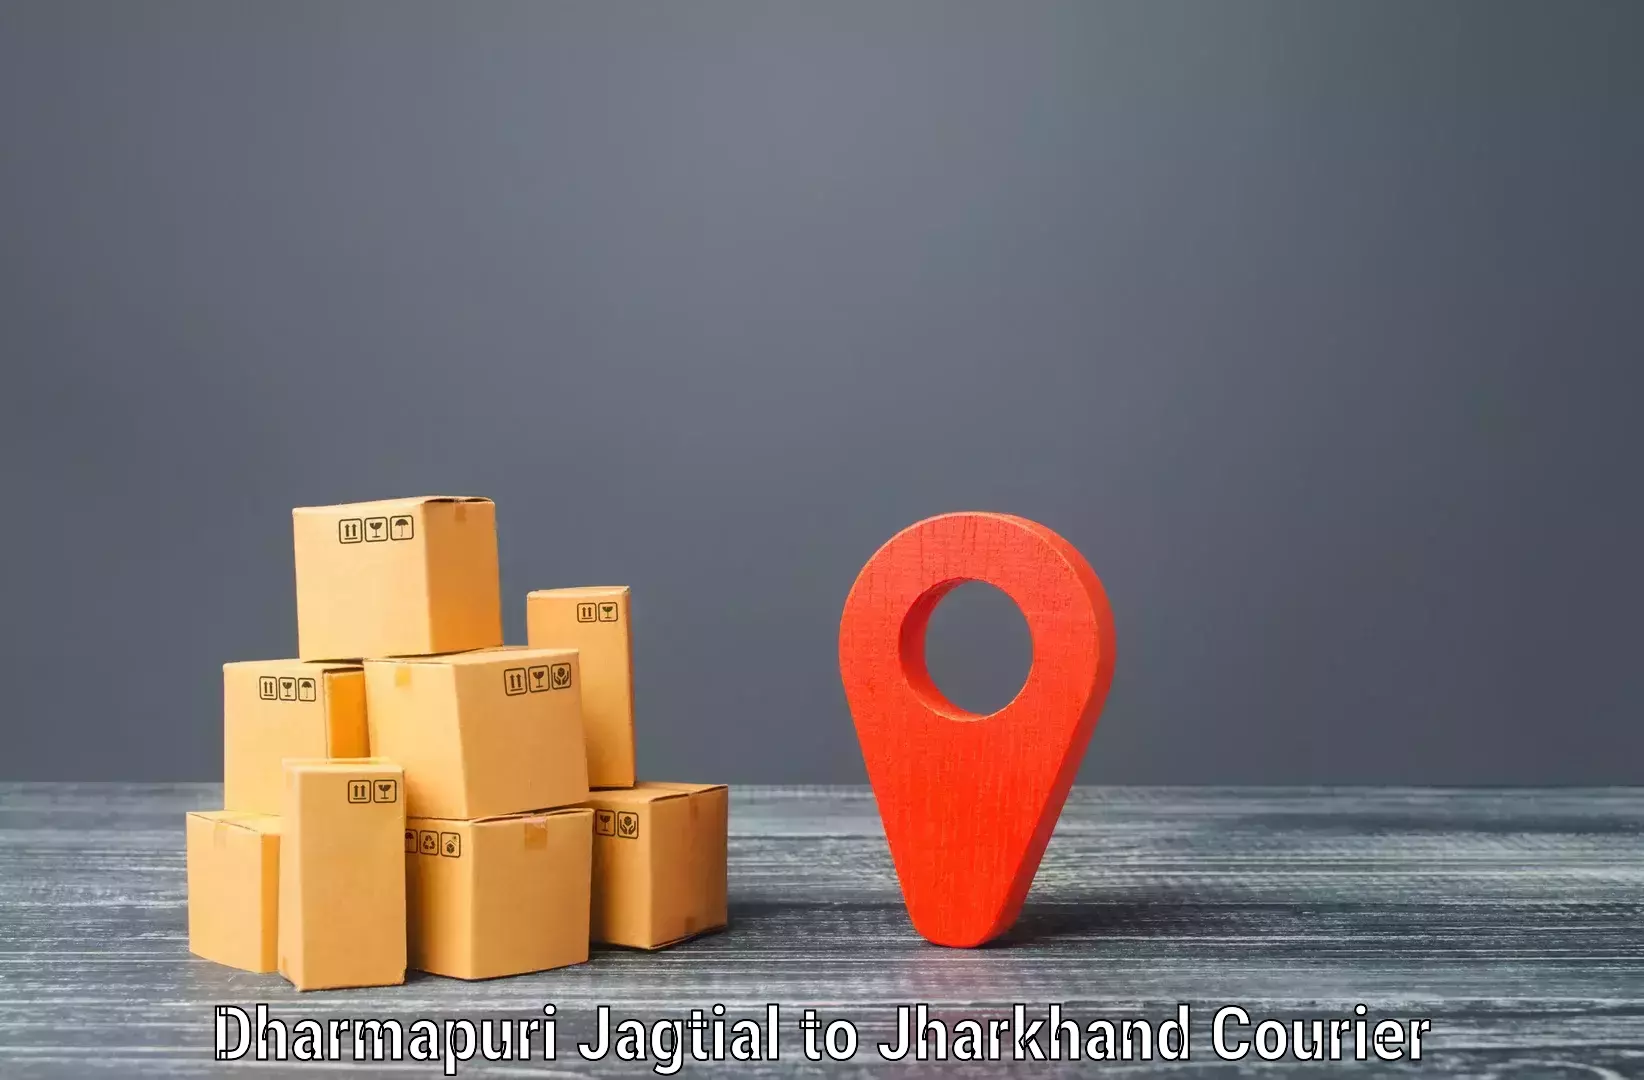 High-quality delivery services Dharmapuri Jagtial to Kedla